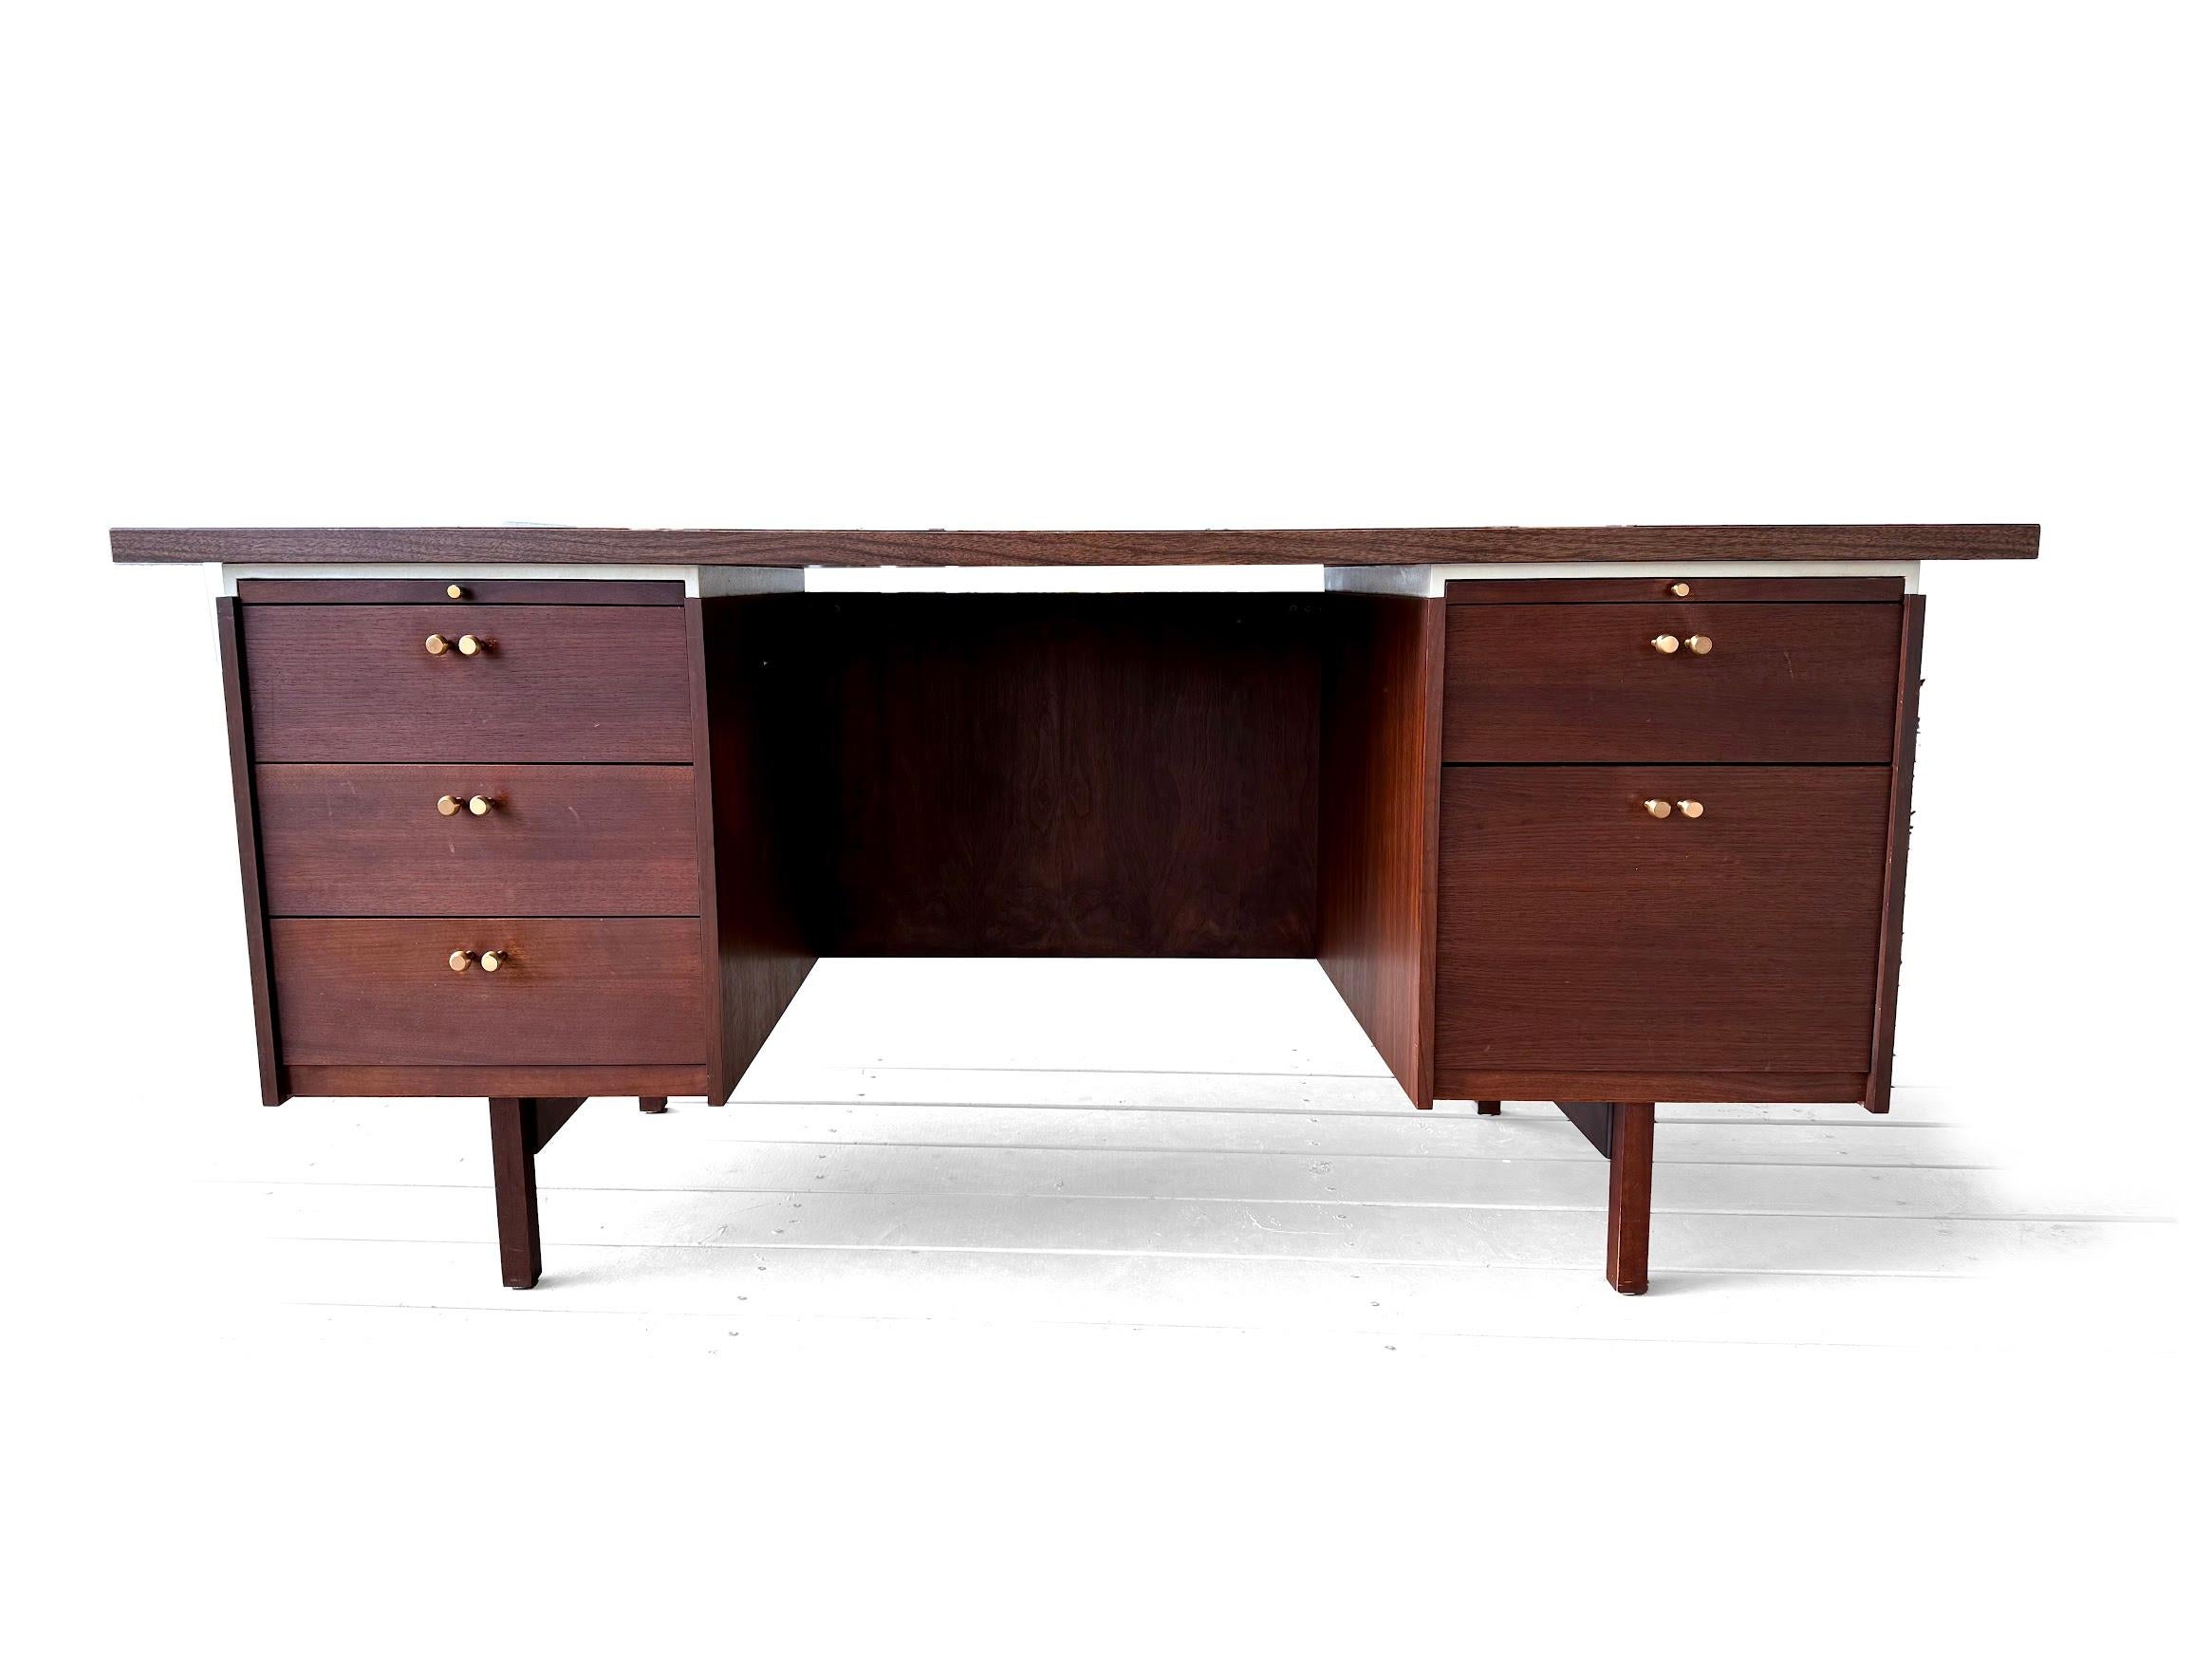 A Midcentury Modern executive desk with a conference size overhanging. Rand & Leopold Desk Company was an office furniture manufacturing firm which operated out of Burlington, Iowa, for 102 years before closing in 1990. Both pull out writing tablets